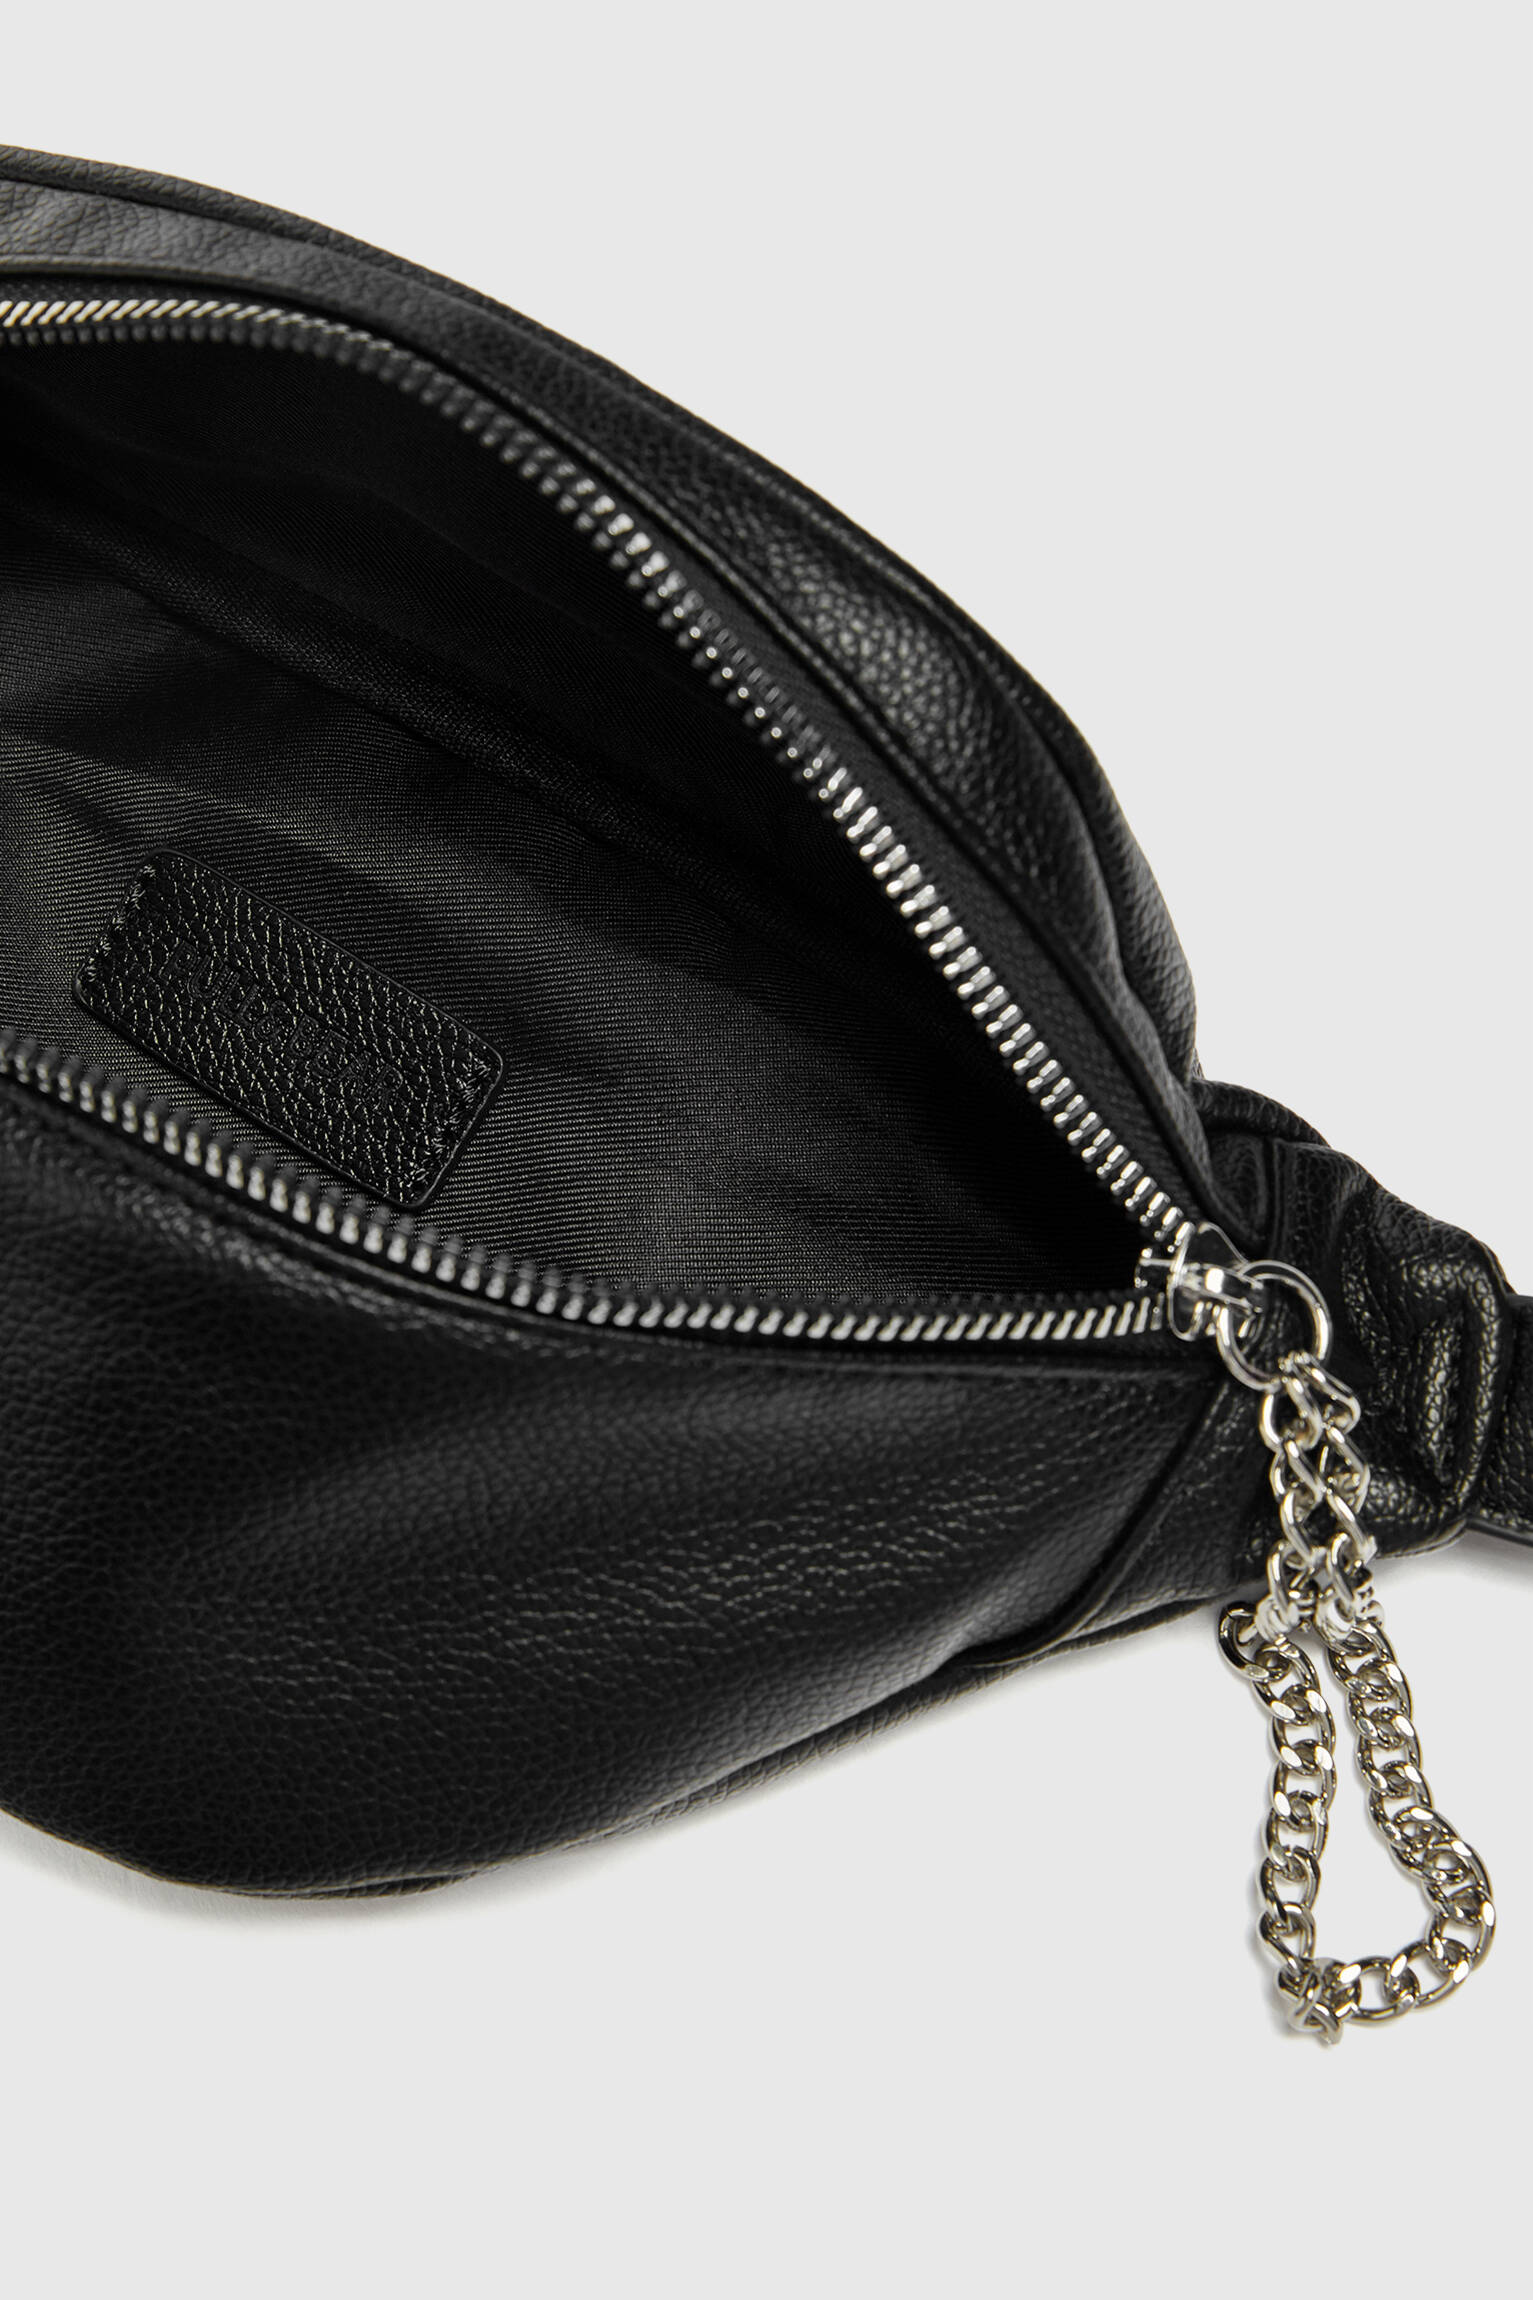 Pull & Bear Fanny pack with chain detail. 4